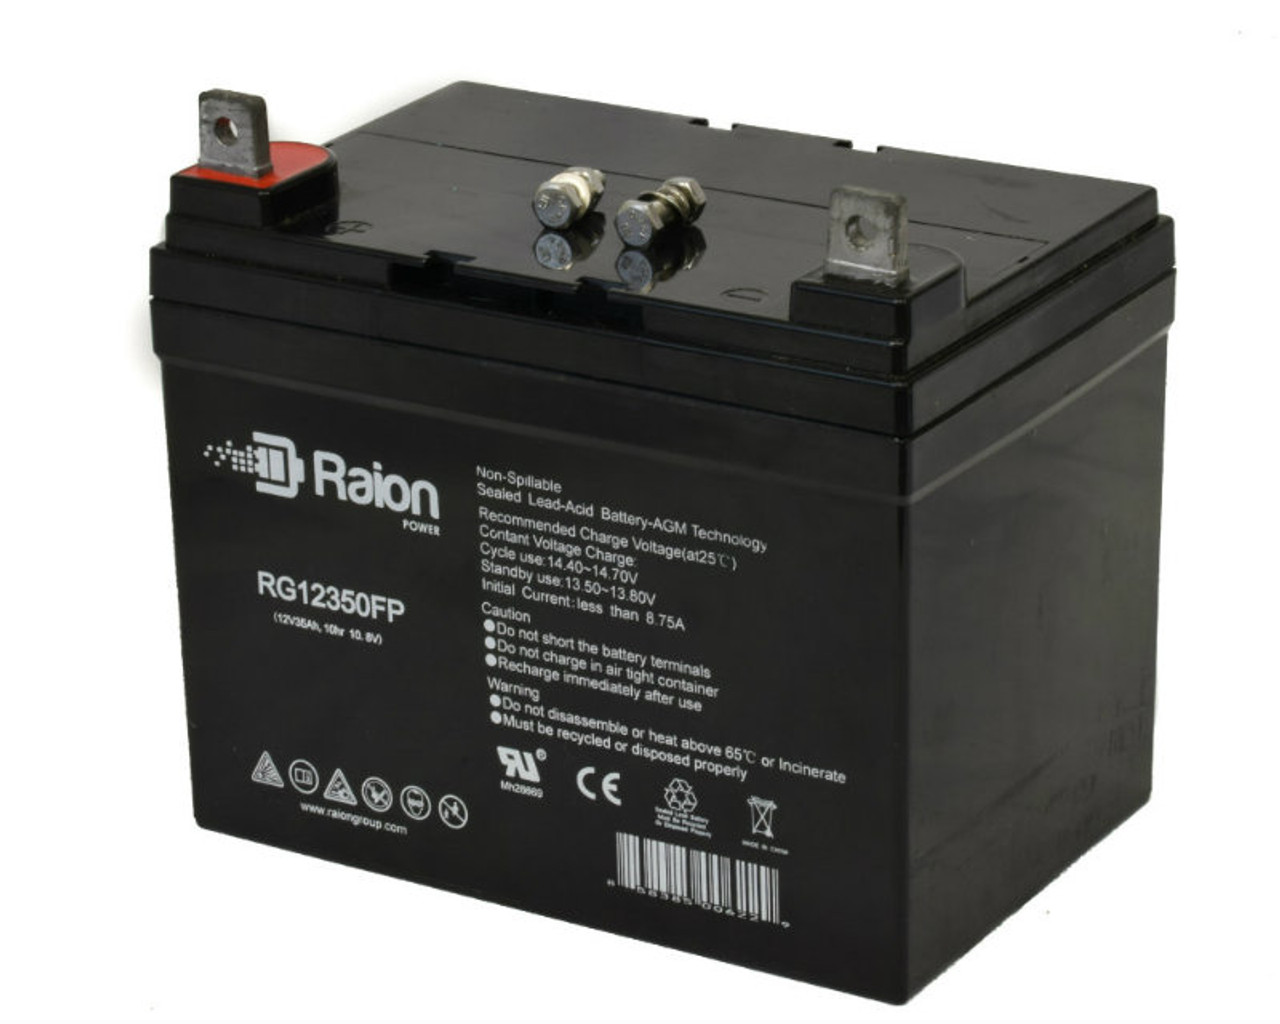 Raion Power Replacement 12V 35Ah Battery for Agco Allis 516G - 1 Pack